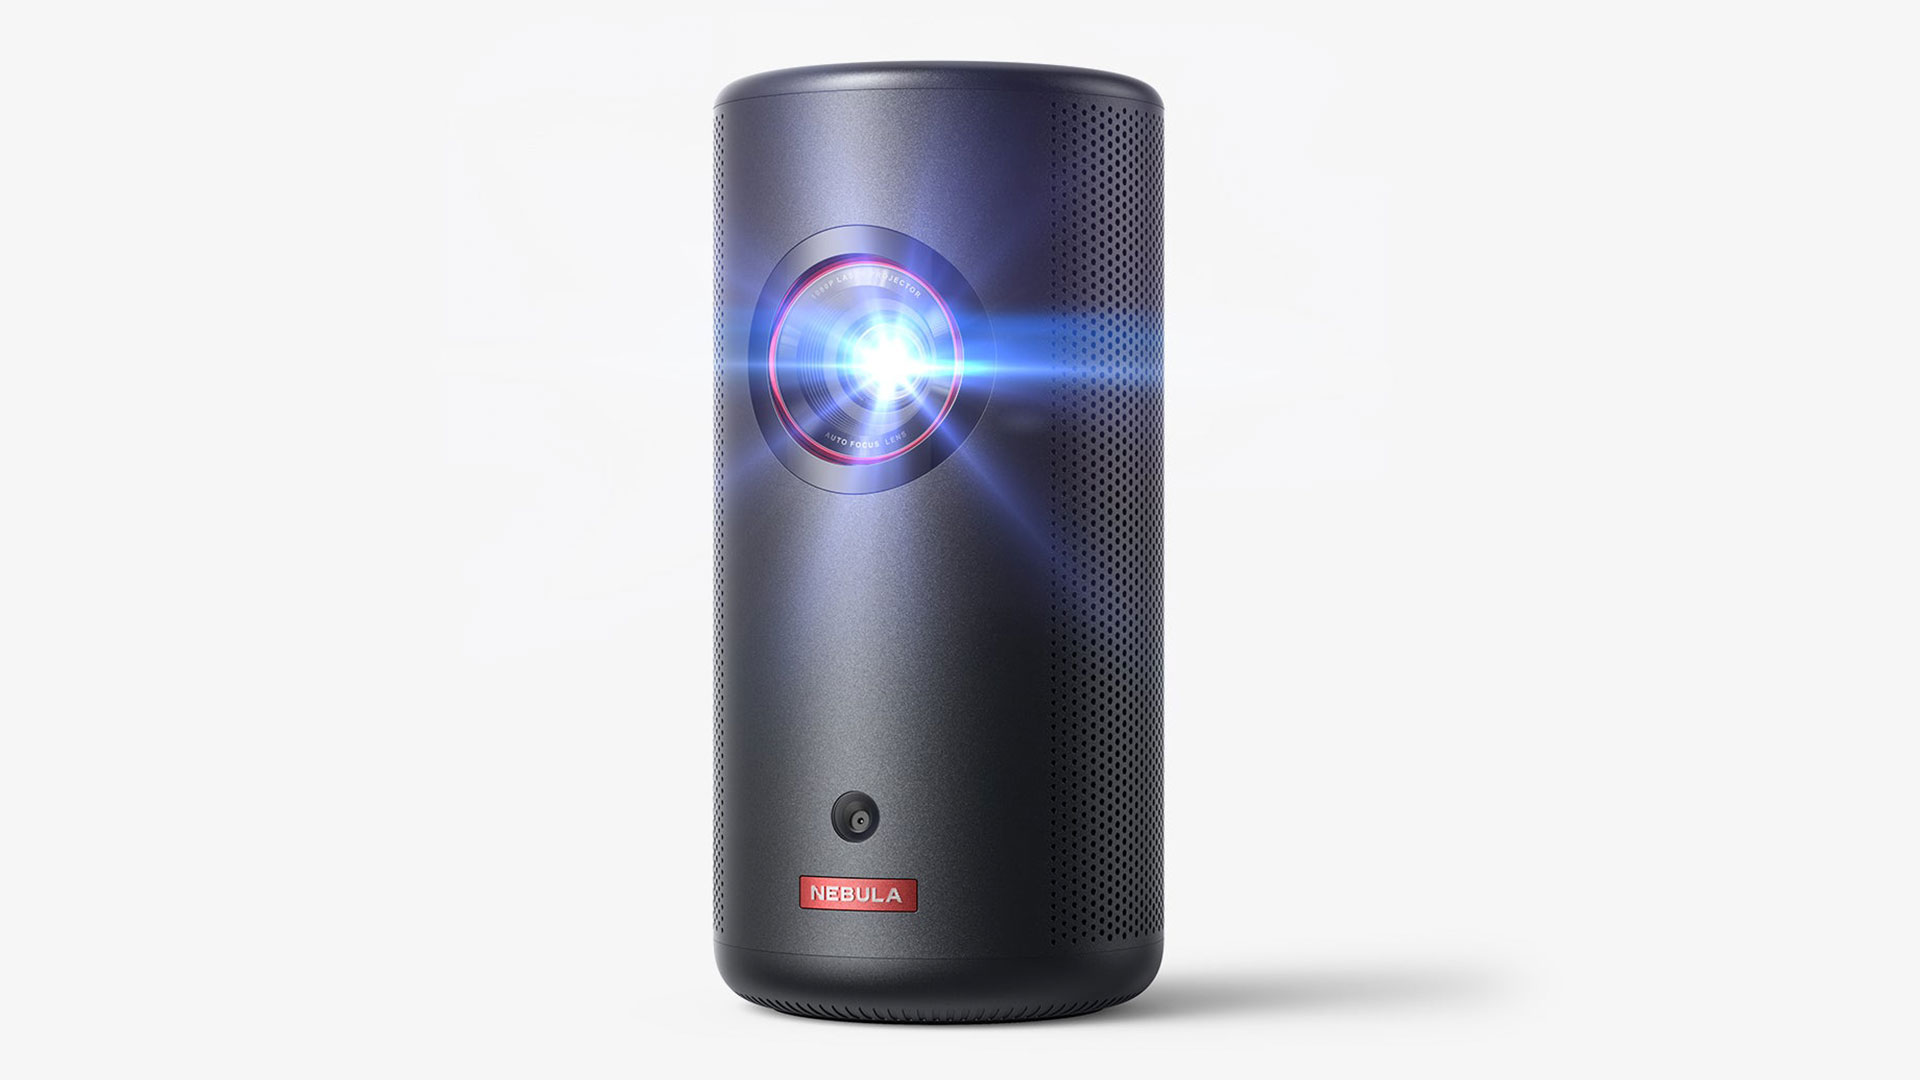 Nebula Capsule 3 Laser Review - Specifications - Projector Reviews